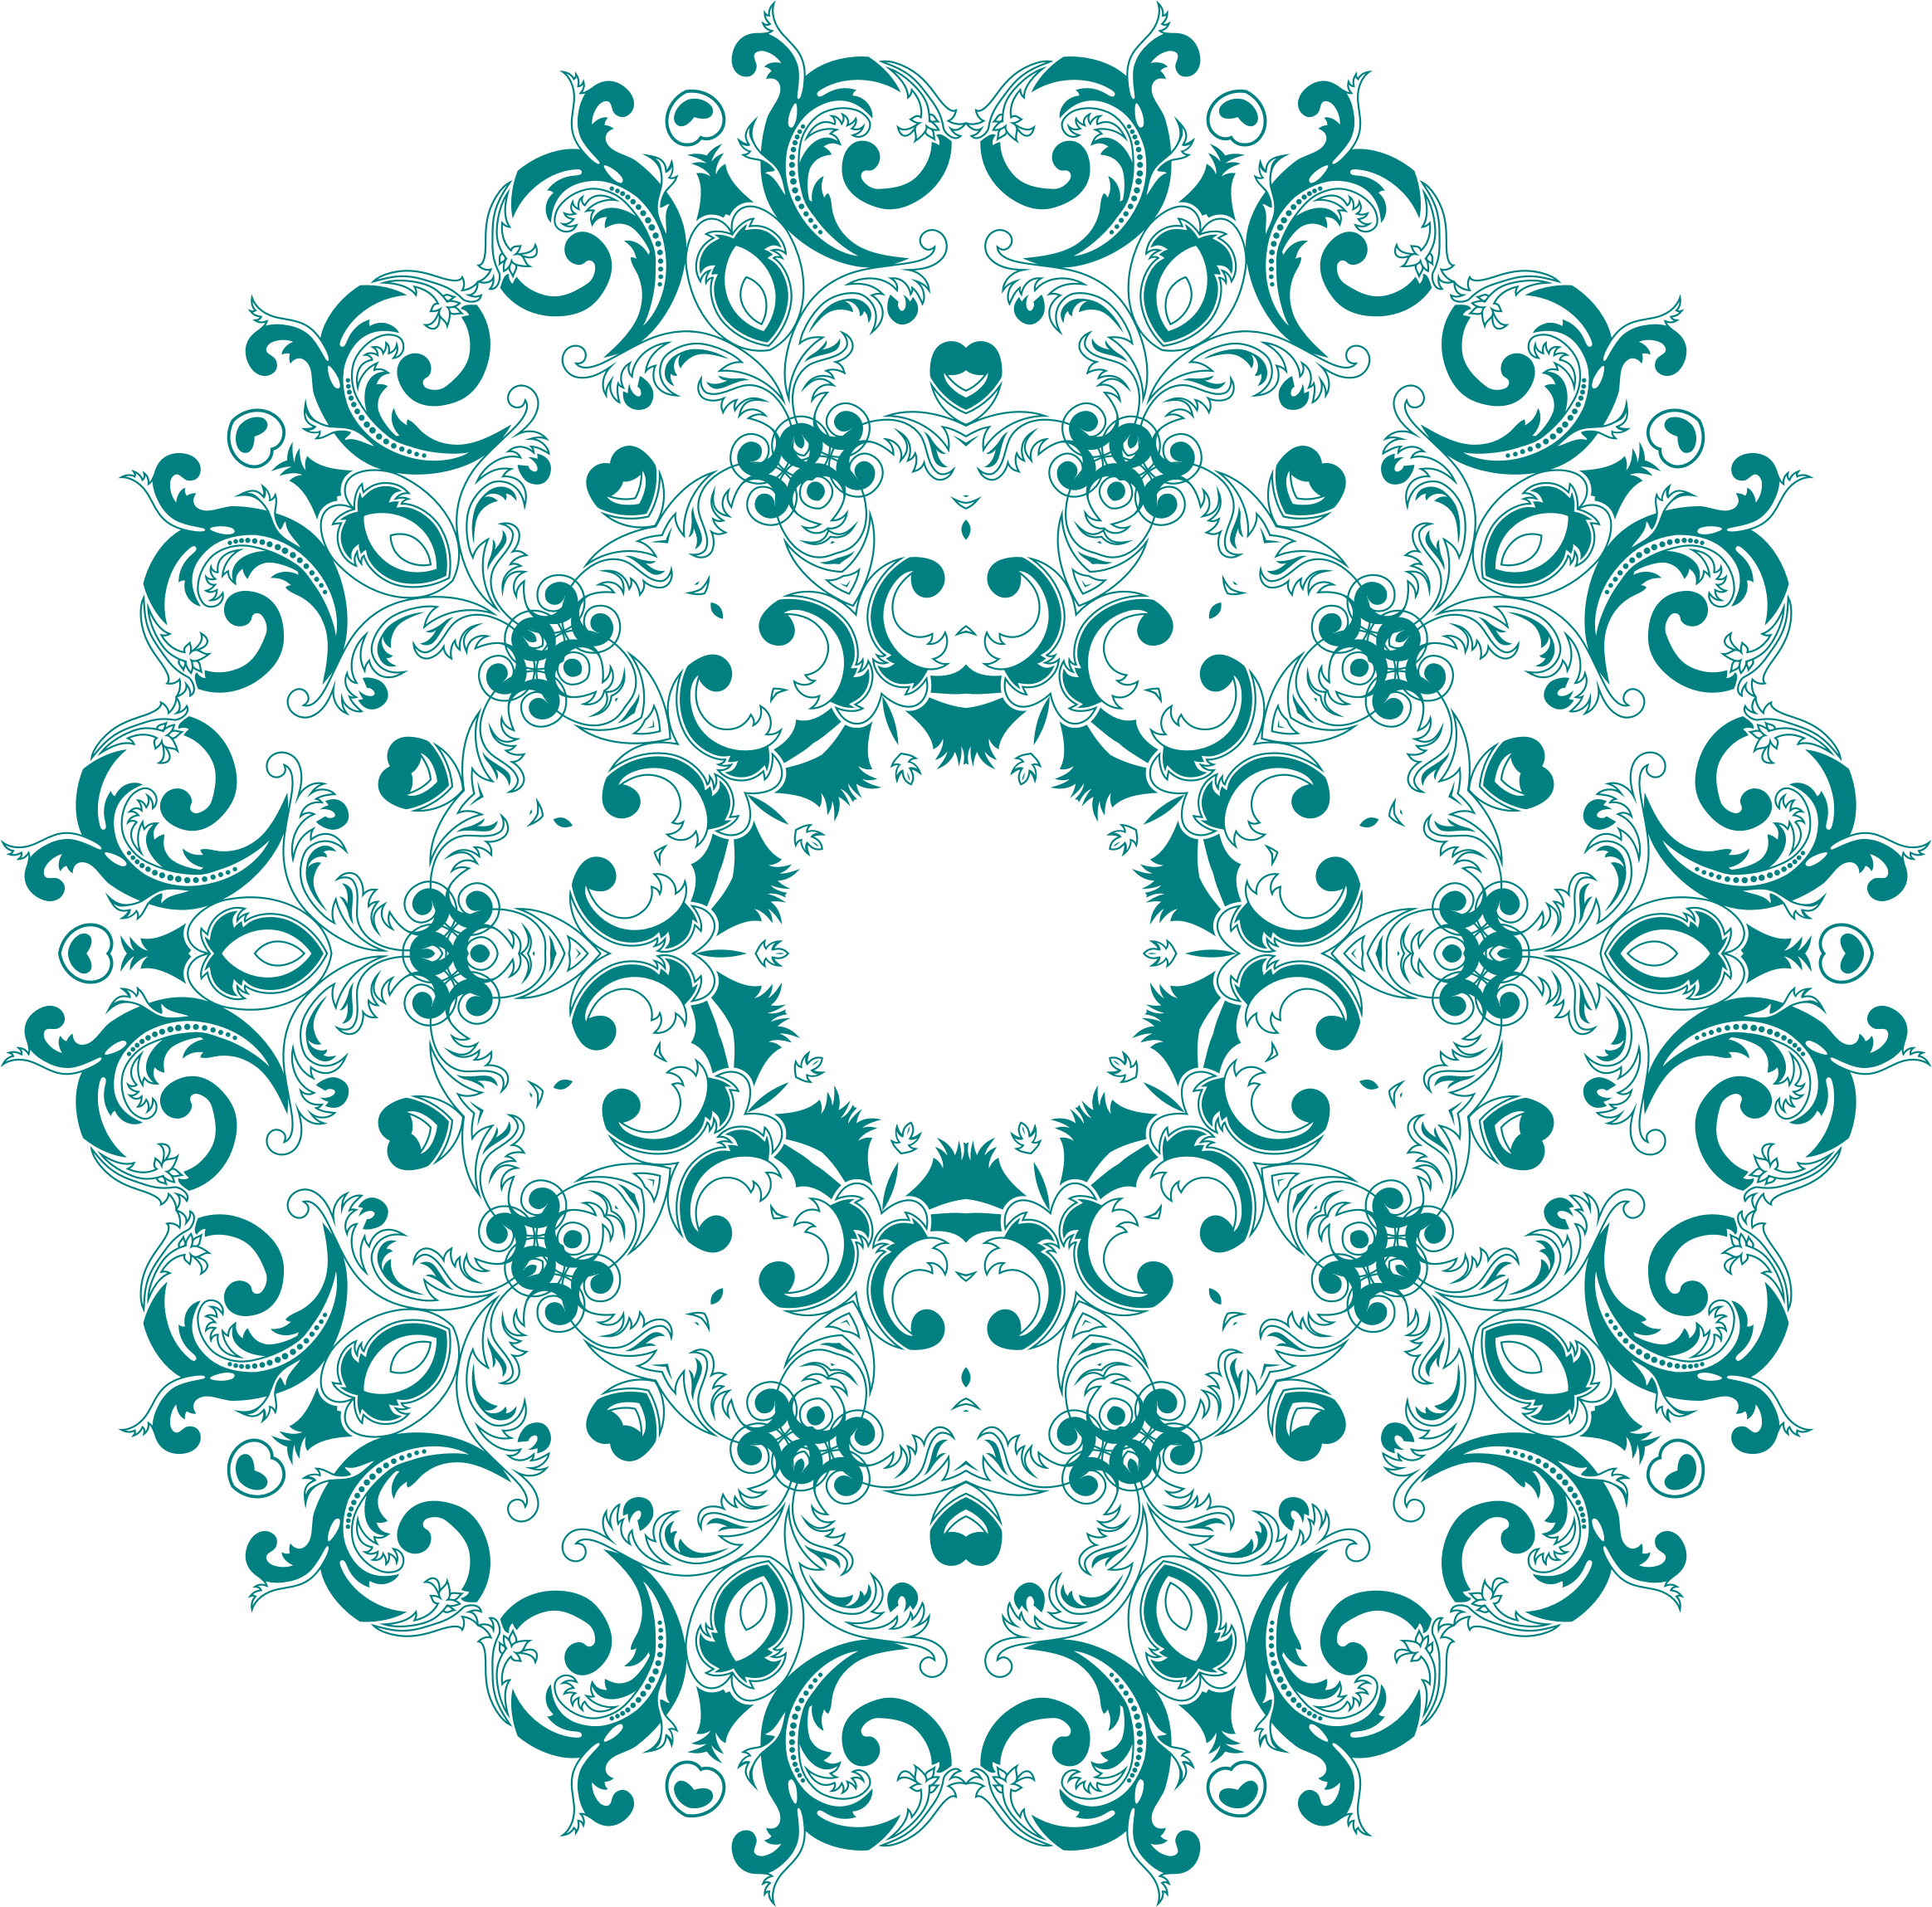 A Circular Pattern With Blue And Black Designs